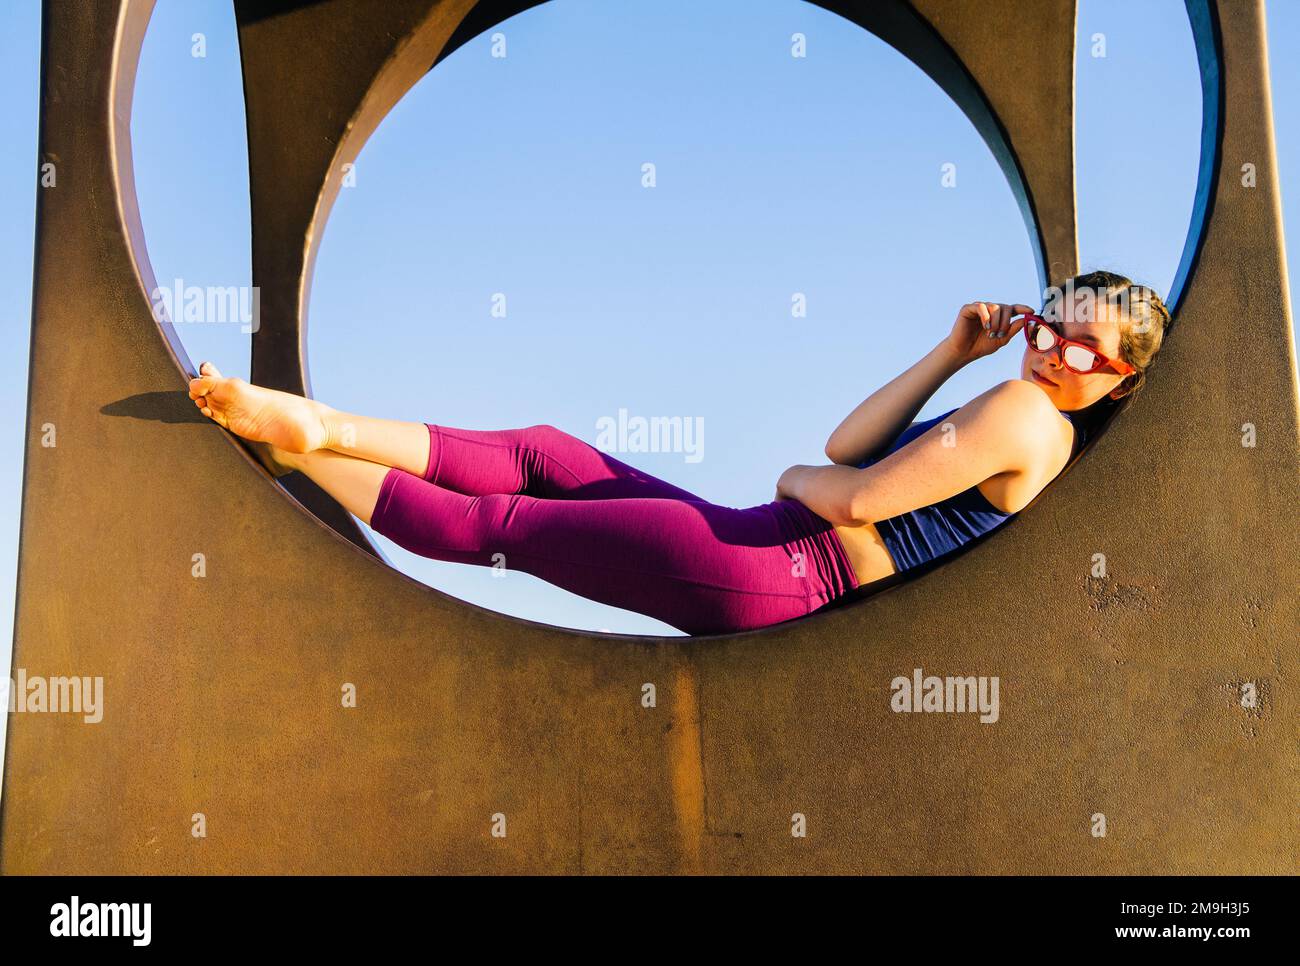 Woman in sunglasses lying on circular structure and looking at camera, Seattle, Washington State, USA Stock Photo